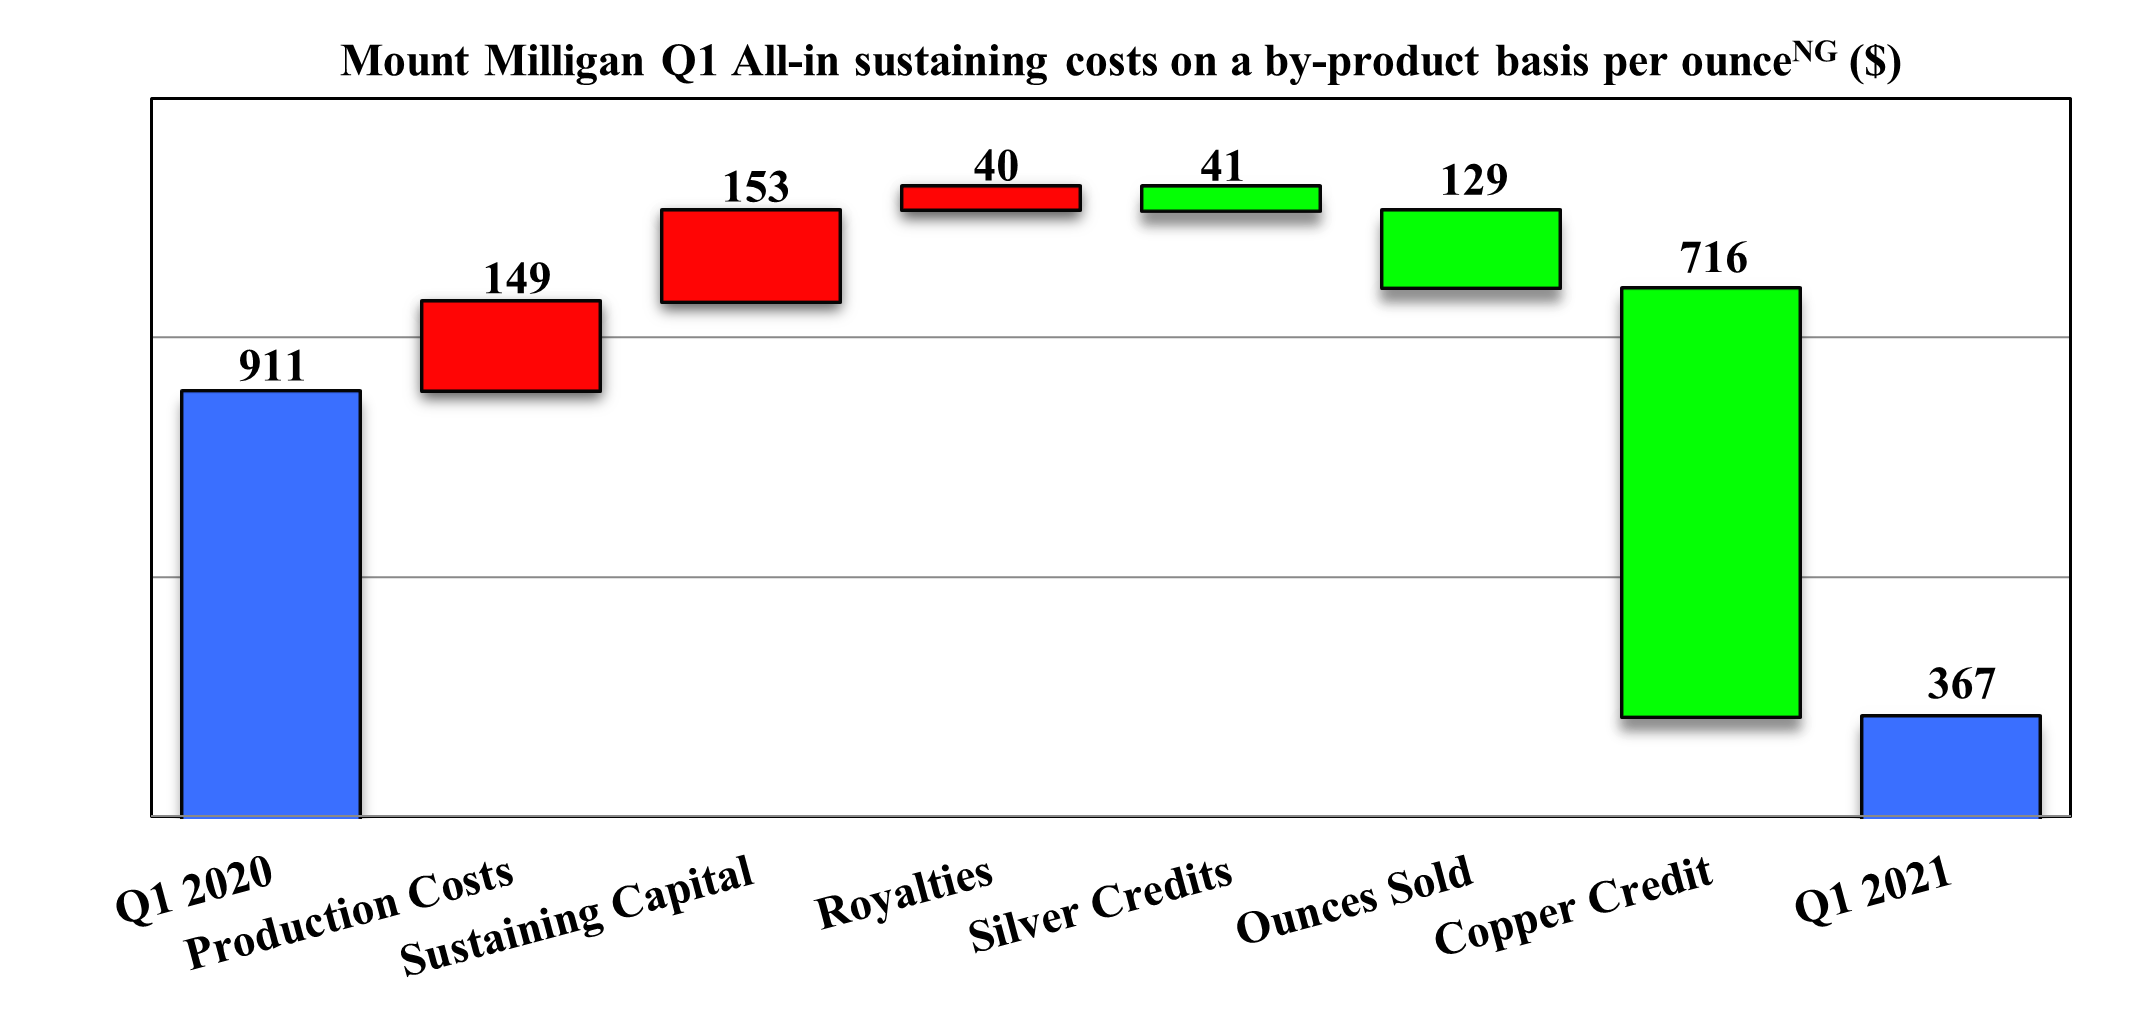 Mount Milligan Q1 All-in sustaining costs on a by-product basis per ounce (Non-GAAP) ($)